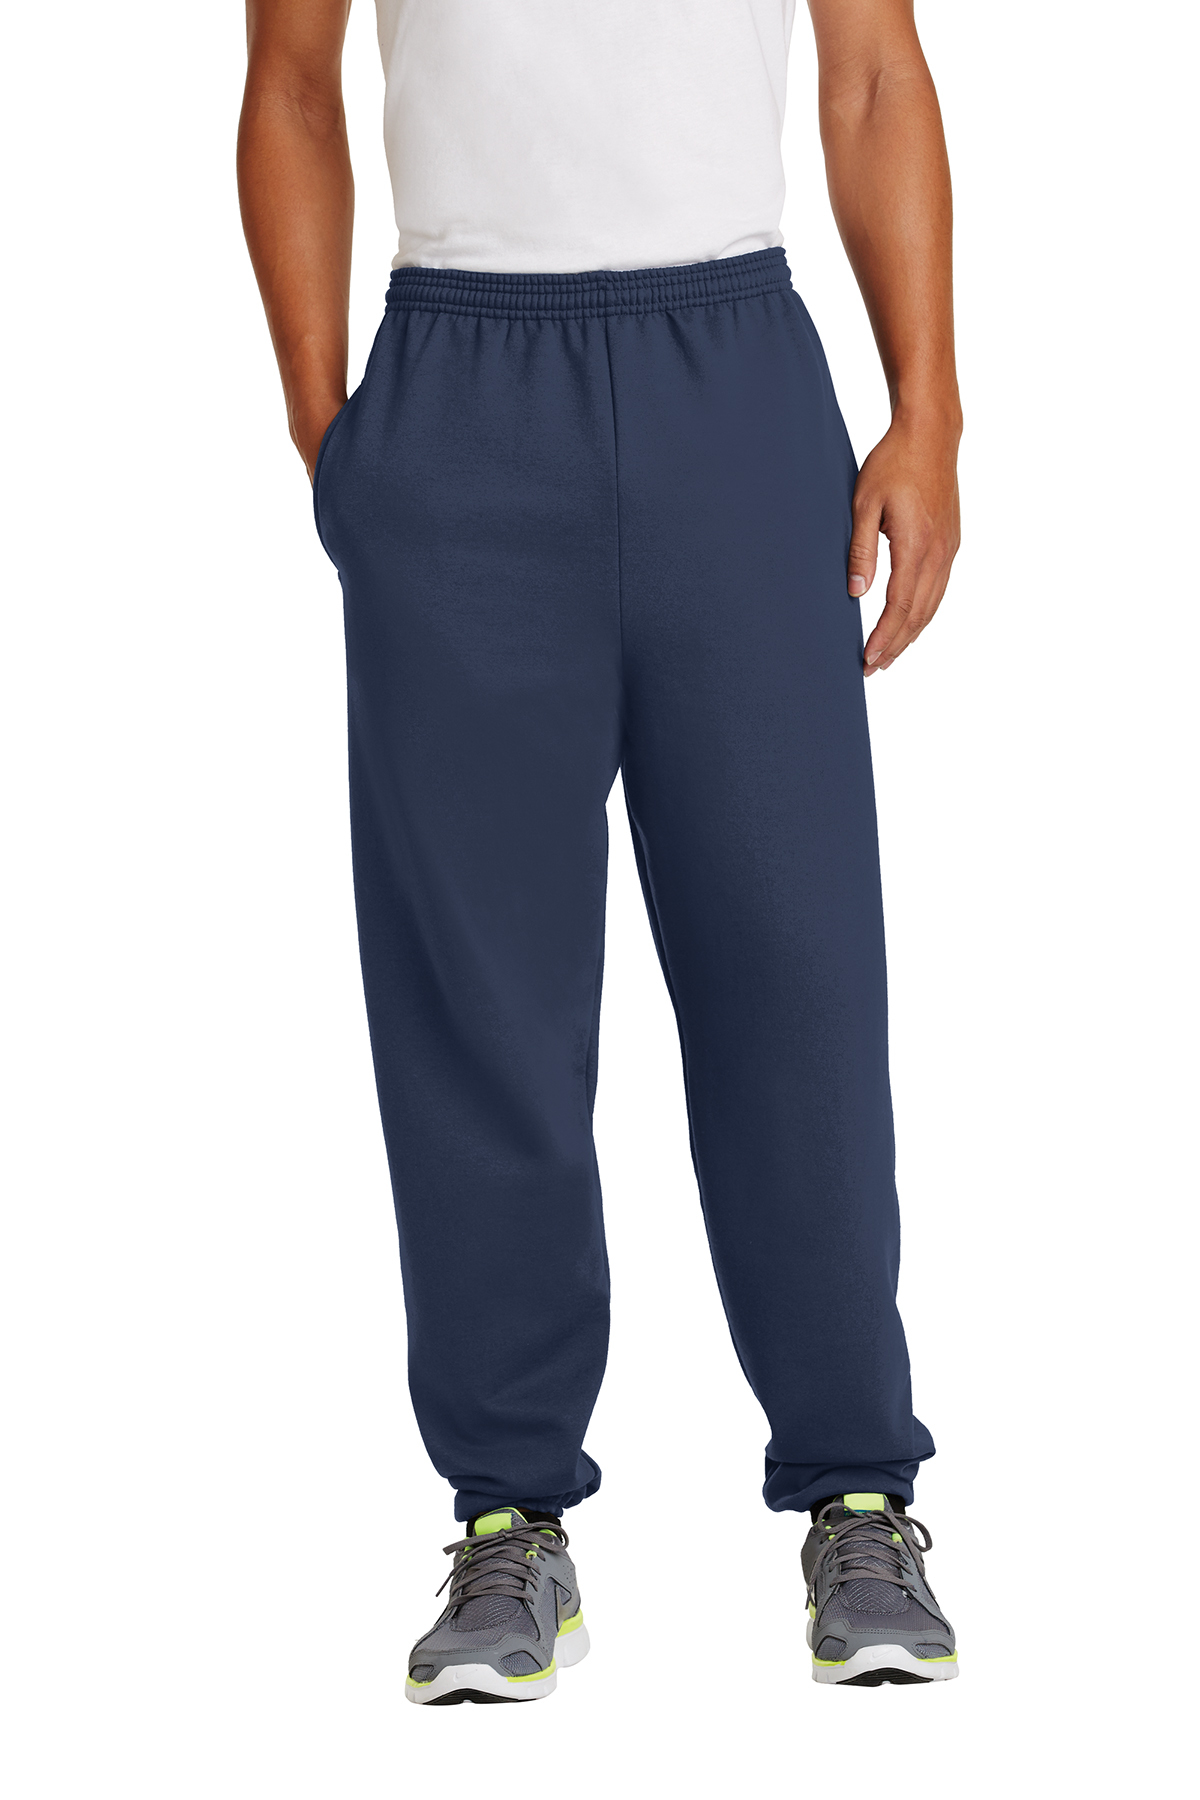 Port & Company - Essential Fleece Sweatpant with Pockets | Product | SanMar